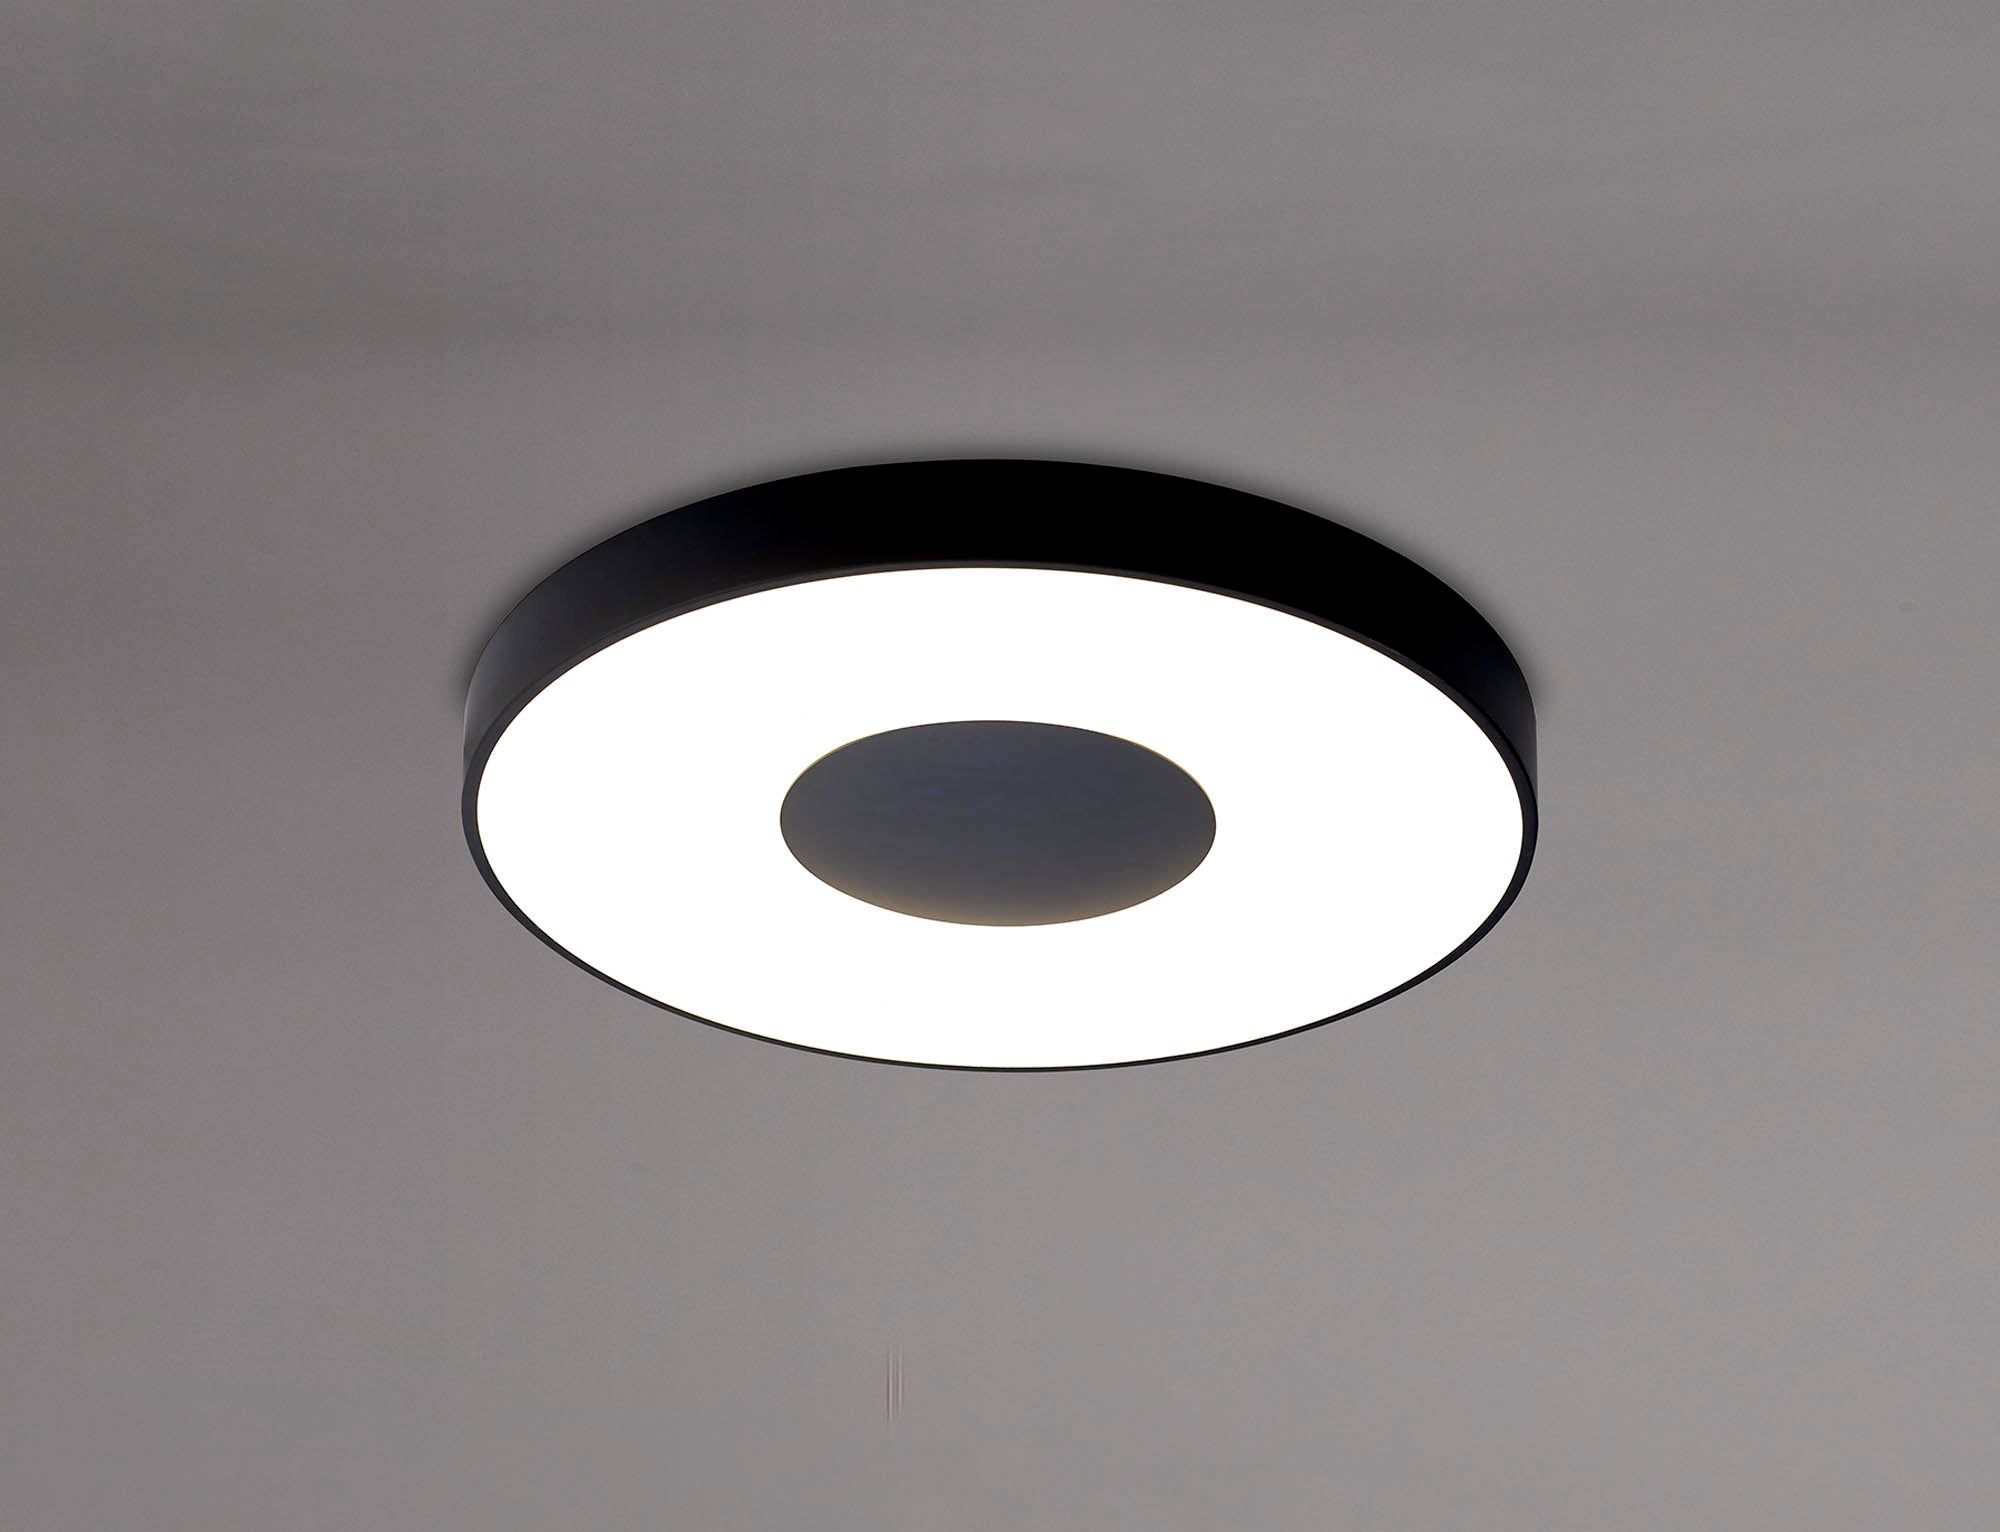 Coin Round Ceiling 80W LED With Remote Control 2700K-5000K, 3900lm, Black, 3yrs Warranty